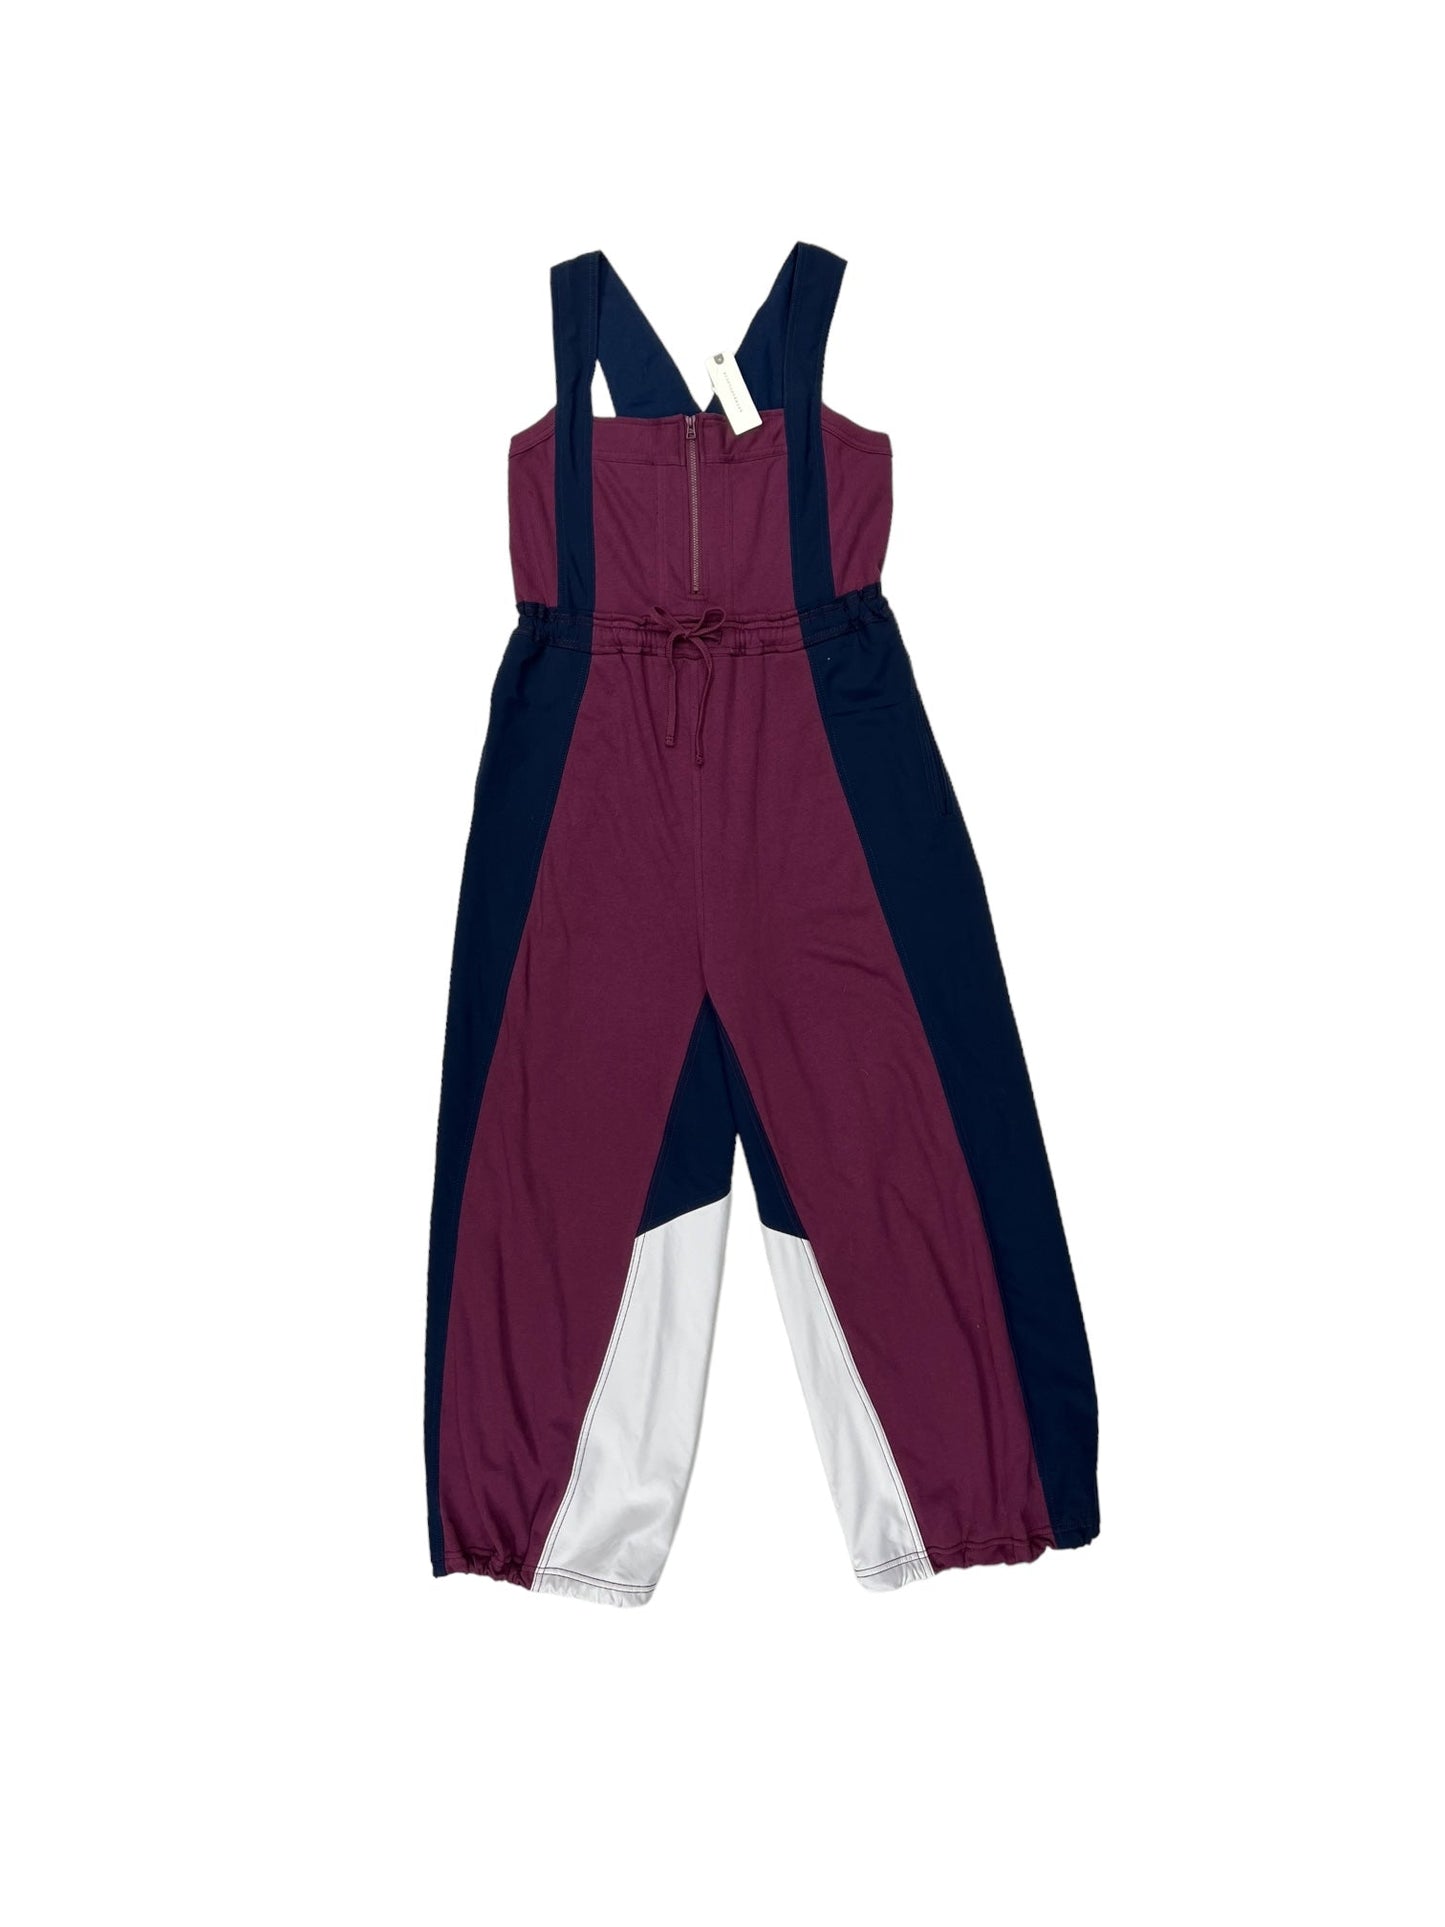 Blue & Purple Jumpsuit Daily Practice By Anthropologie, Size S